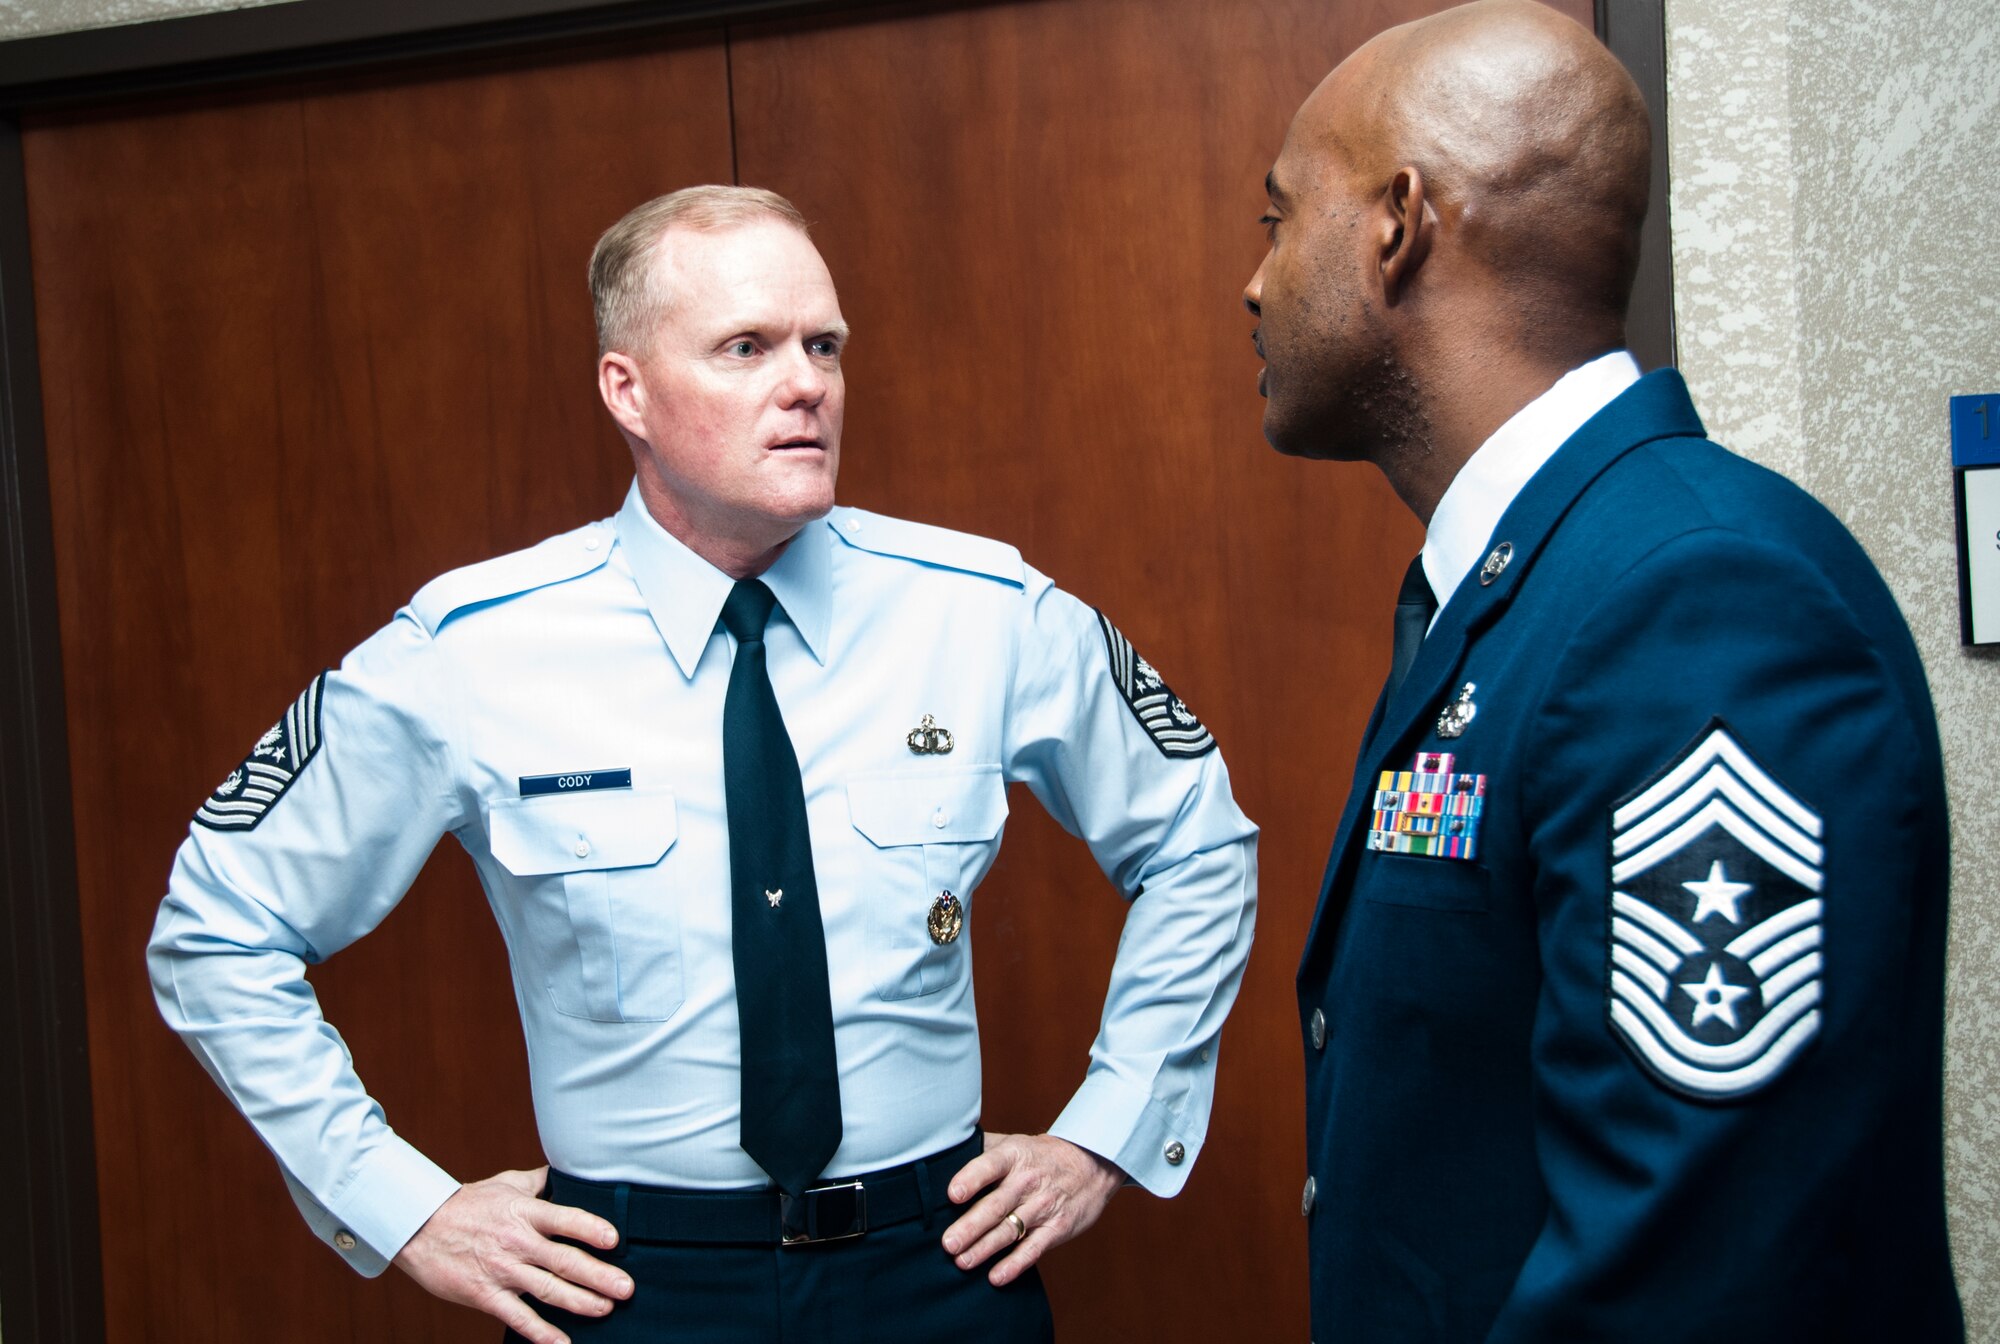 Chief Master Sgt. of the Air Force James A. Cody talks with Chief Master Sgt. Cameron Kirksey, Air Force Reserve Command command chief, at Dobbins Air Reserve Base, Ga., Nov. 17, 2014. Cody came to Dobbins to visit the Atlanta Regional Military Appreciation Committee in Marietta, Georgia for its 62nd annual luncheon. (U.S. Air Force photo by Senior Airman Daniel Phelps/Released)